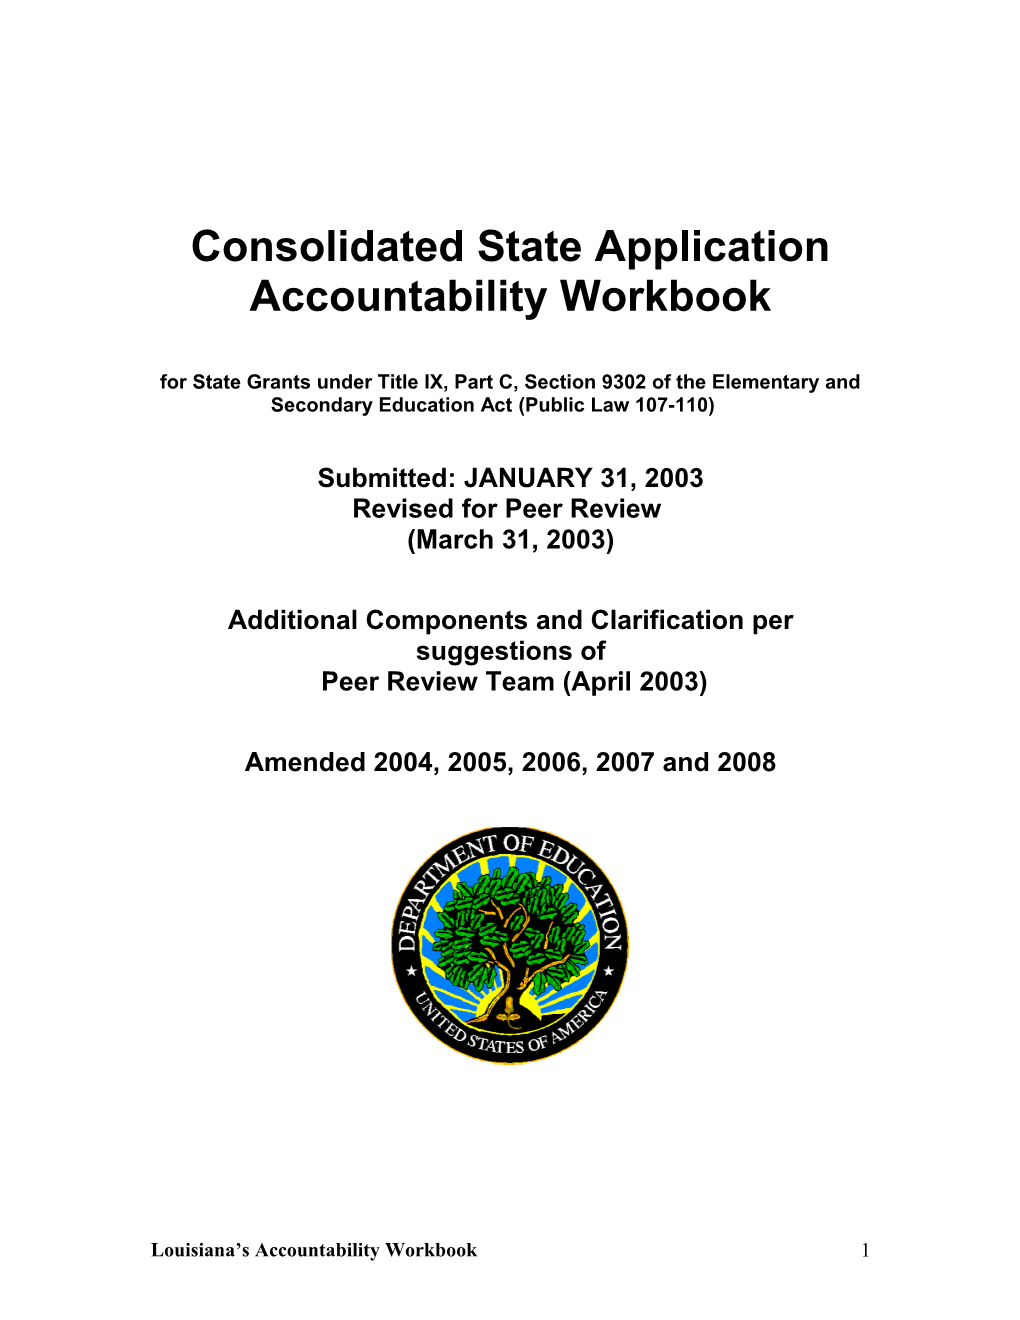 Consolidated State Application Accountability Workbook (MS Word)